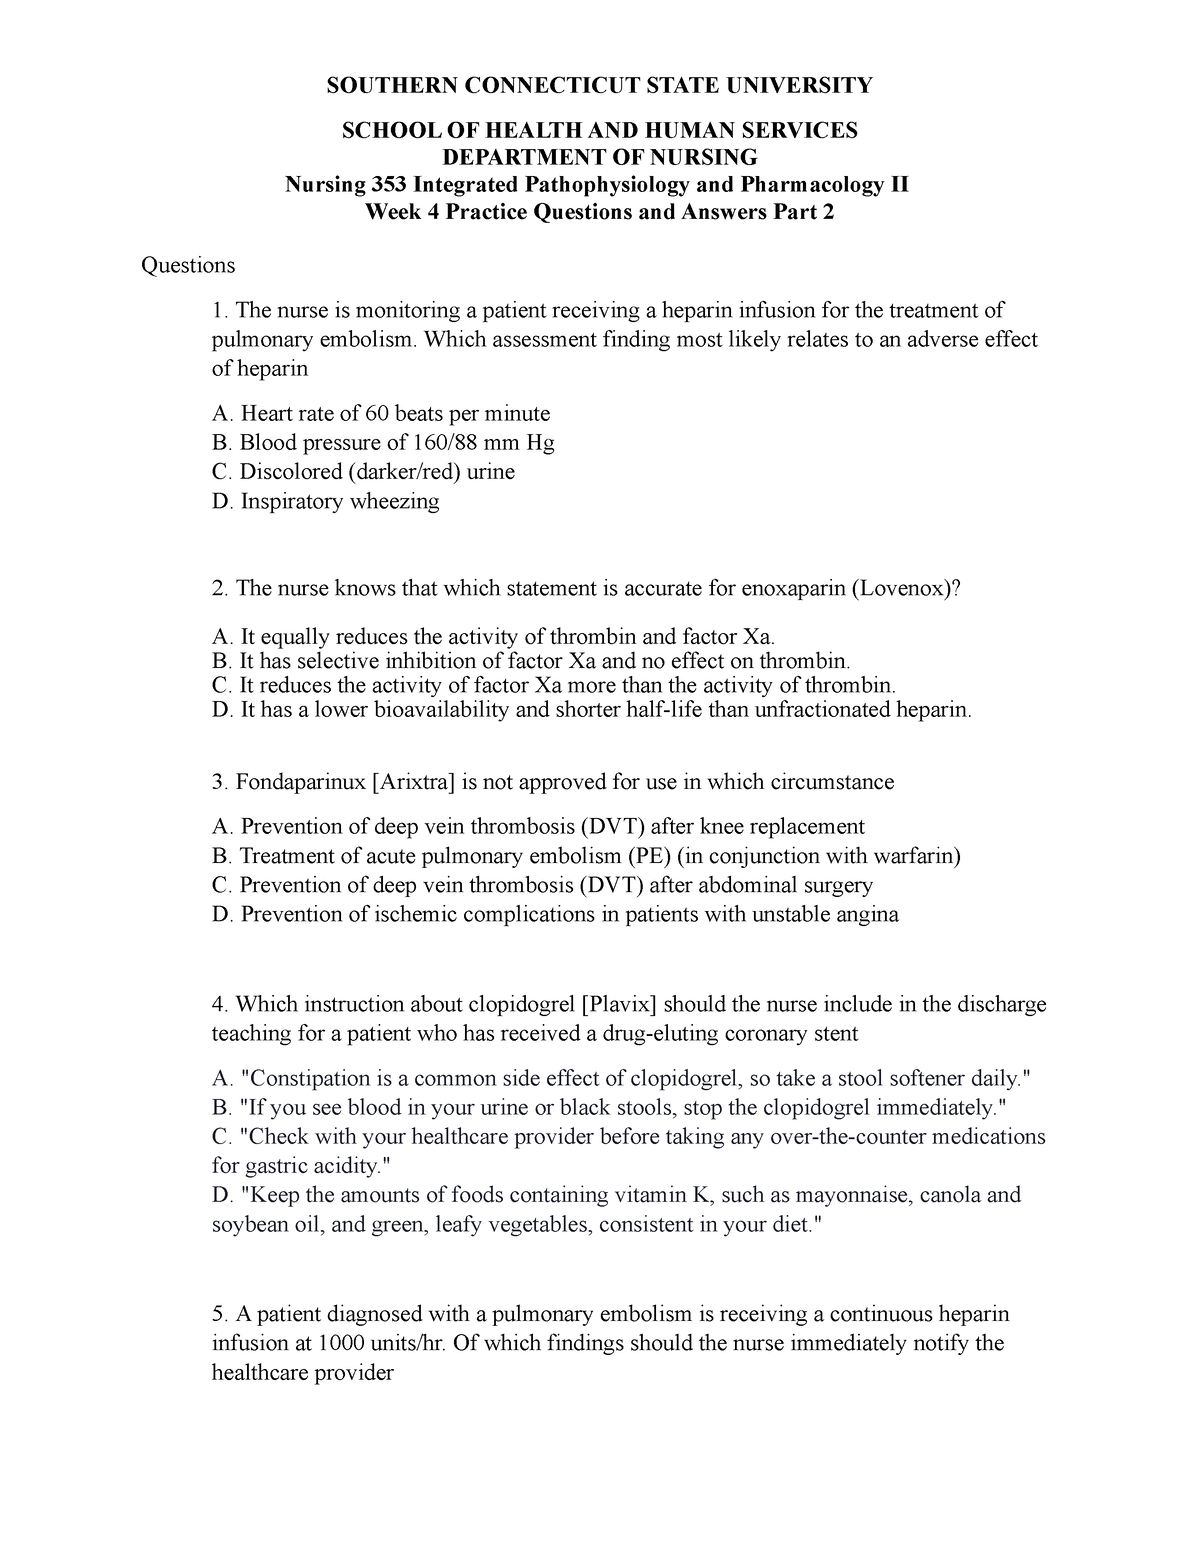 week-4-q-a-part-2-practice-qas-southern-connecticut-state-university-school-of-health-and